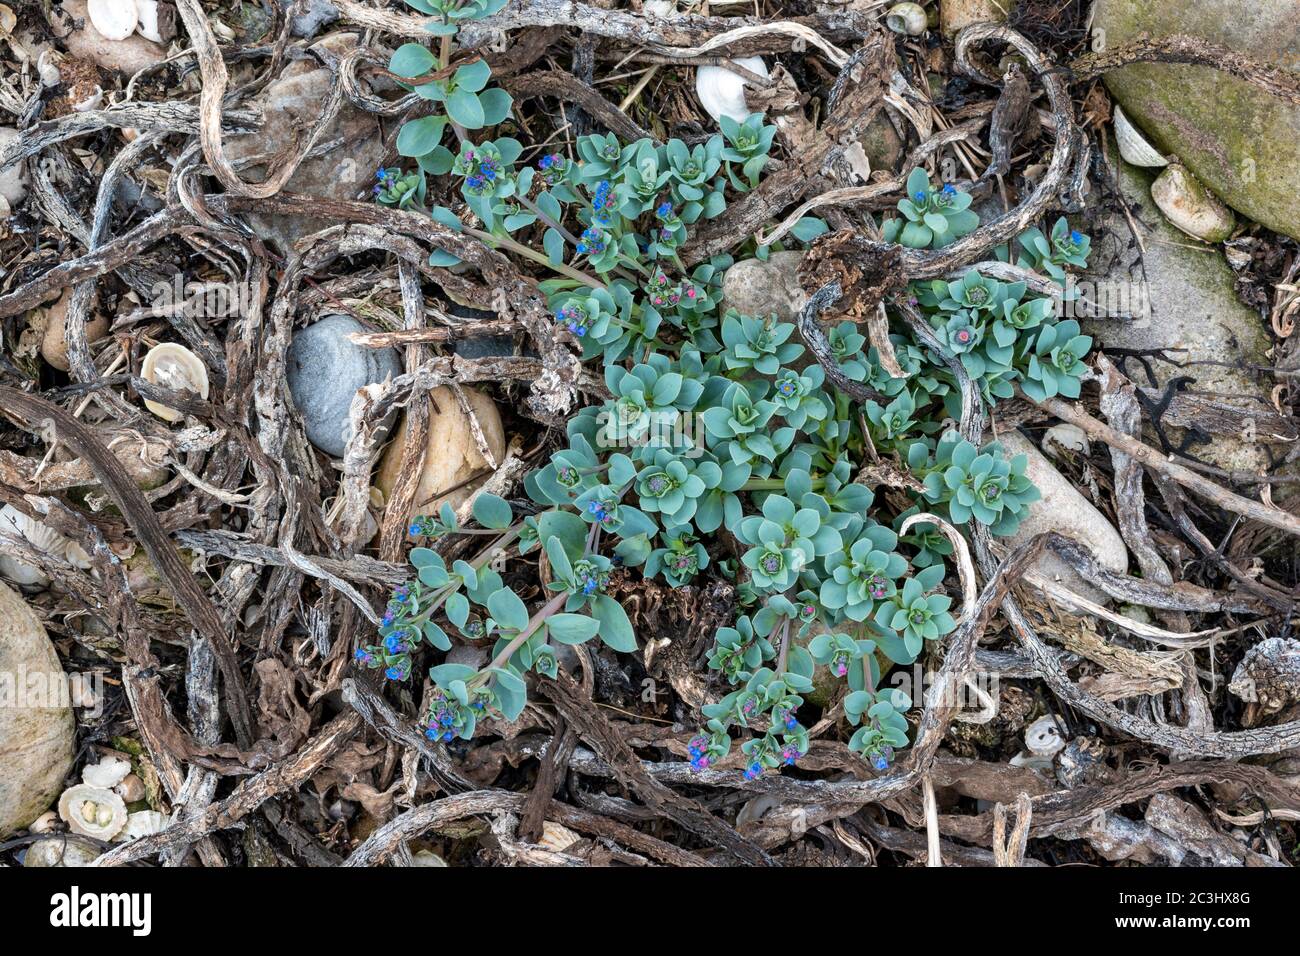 OYSTERPLANT Mertensia maritima A BLUE GREEN PLANT AND STEMS WITH BRIGHT BLUE FLOWERS ON A SEASHELL AND DRIED KELP OR SEAWEED COVERED BEACH MORAY COAST Stock Photo